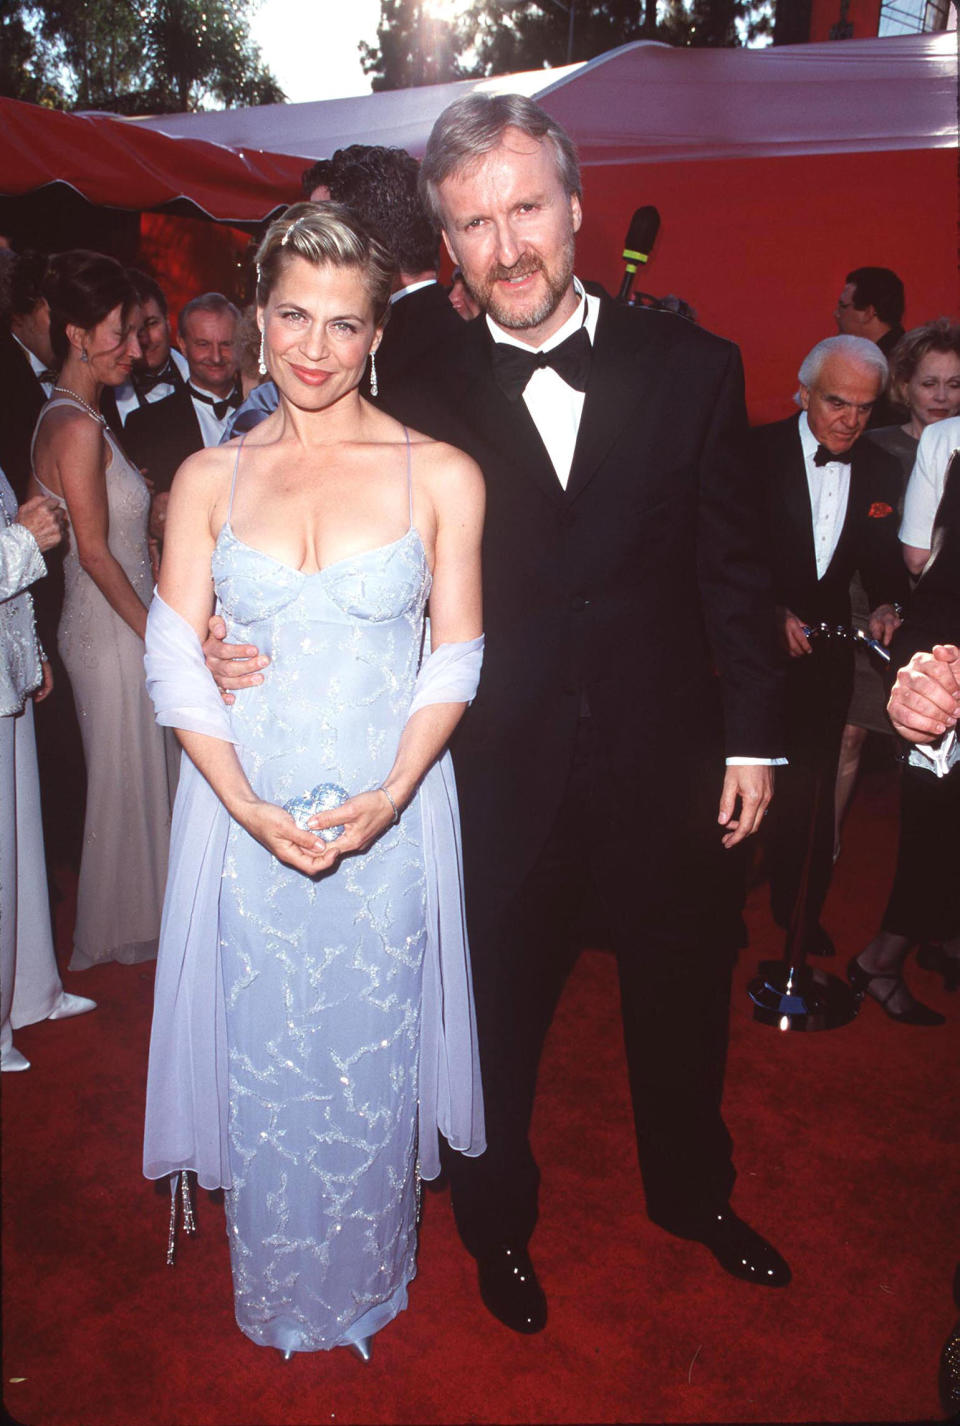 James Cameron and Linda Hamilton attend The 70th Annual Academy Awards together. (Photo: Steve Granitz via Getty Images)